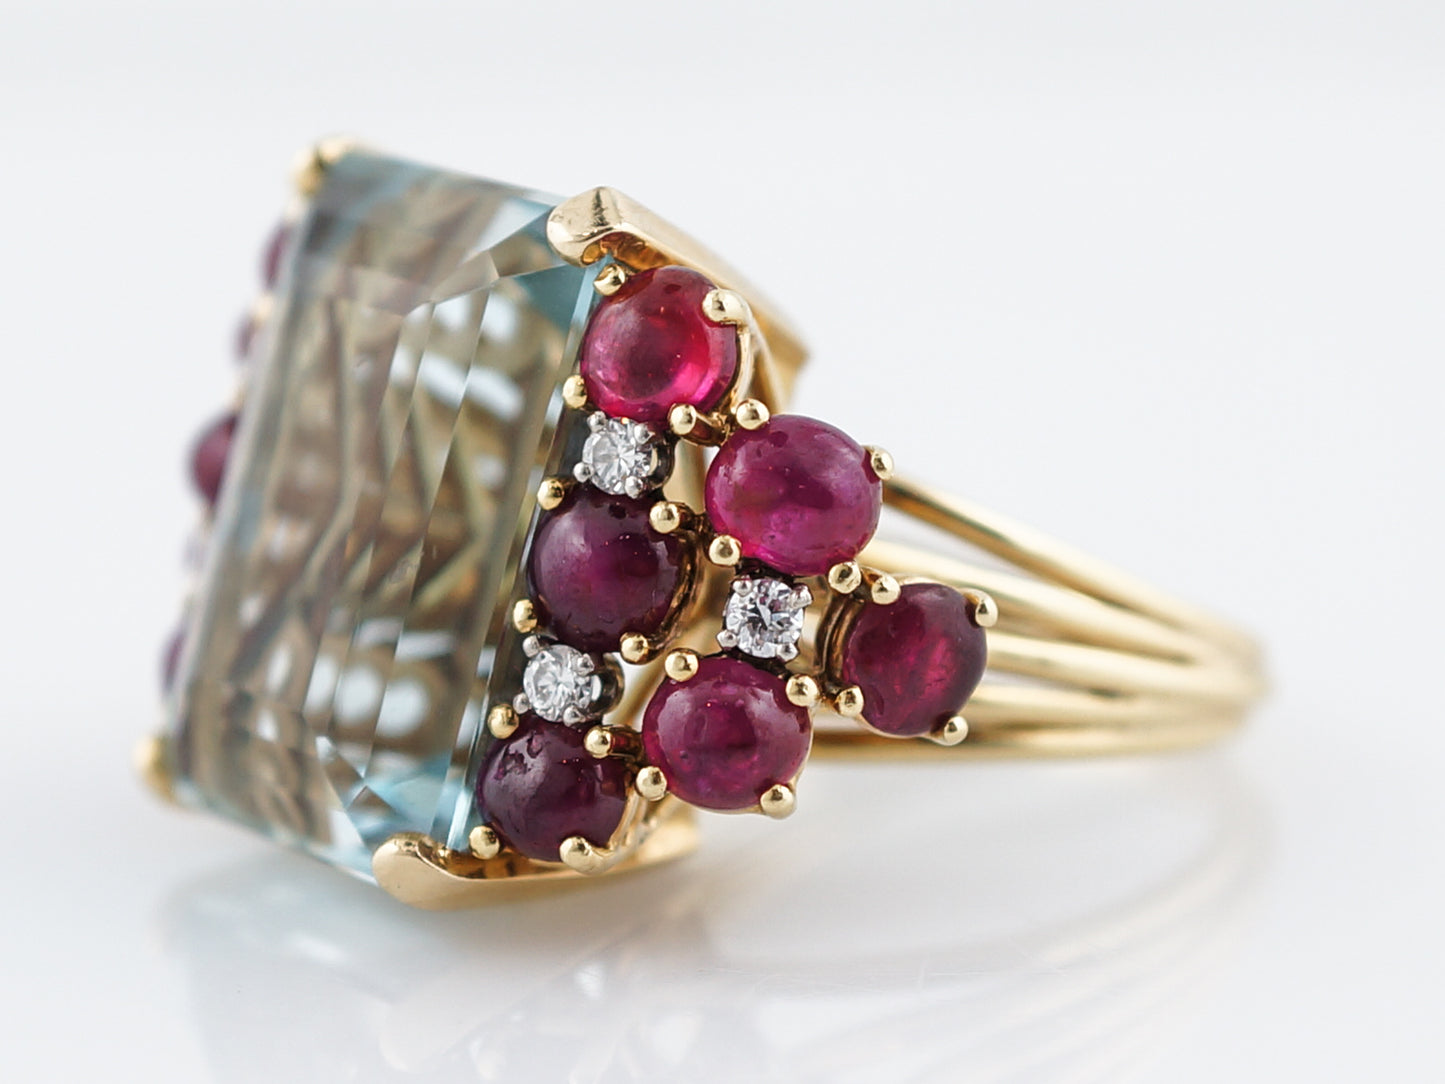 Vintage Cocktail Ring Retro 27.00 Aquamarine, Ruby and Diamond in 18K Yellow Gold